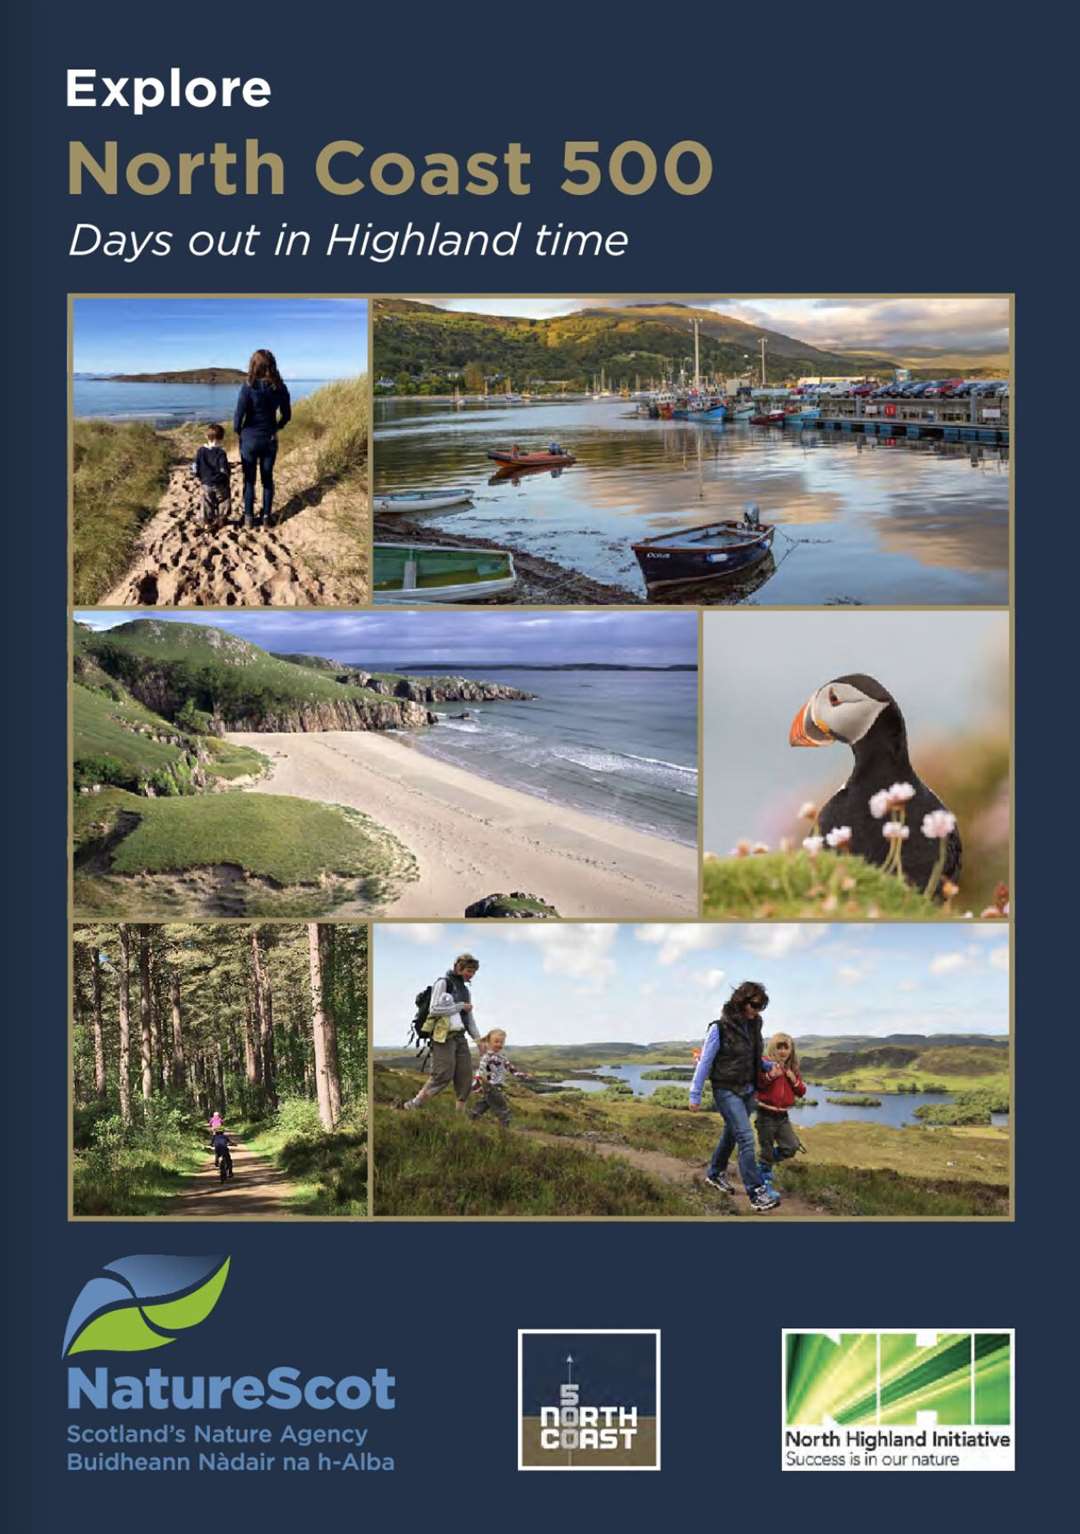 The e-brochure is available via the NatureScot website.